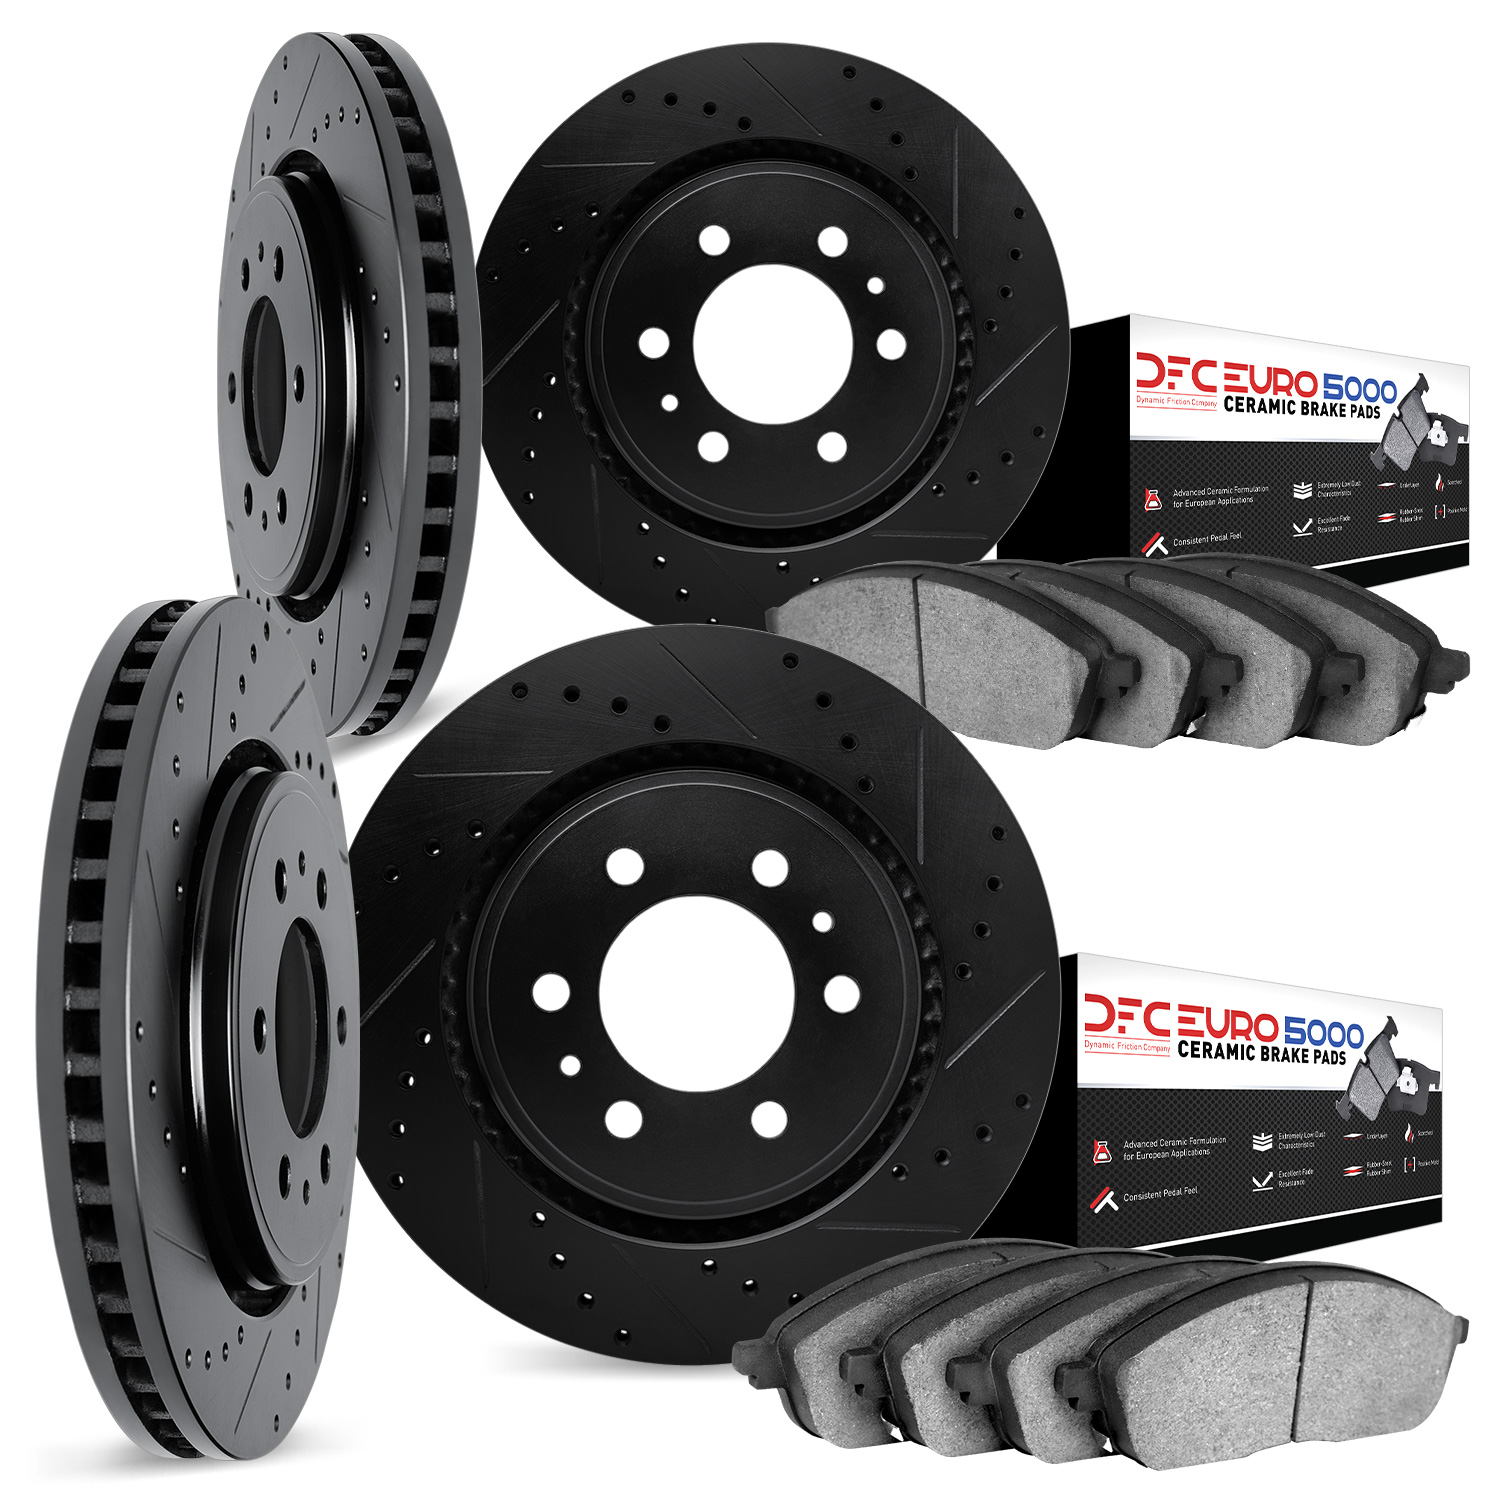 8604-48000 Drilled/Slotted Brake Rotors w/5000 Euro Ceramic Brake Pads Kit [Black], 2002-2005 GM, Position: Front and Rear